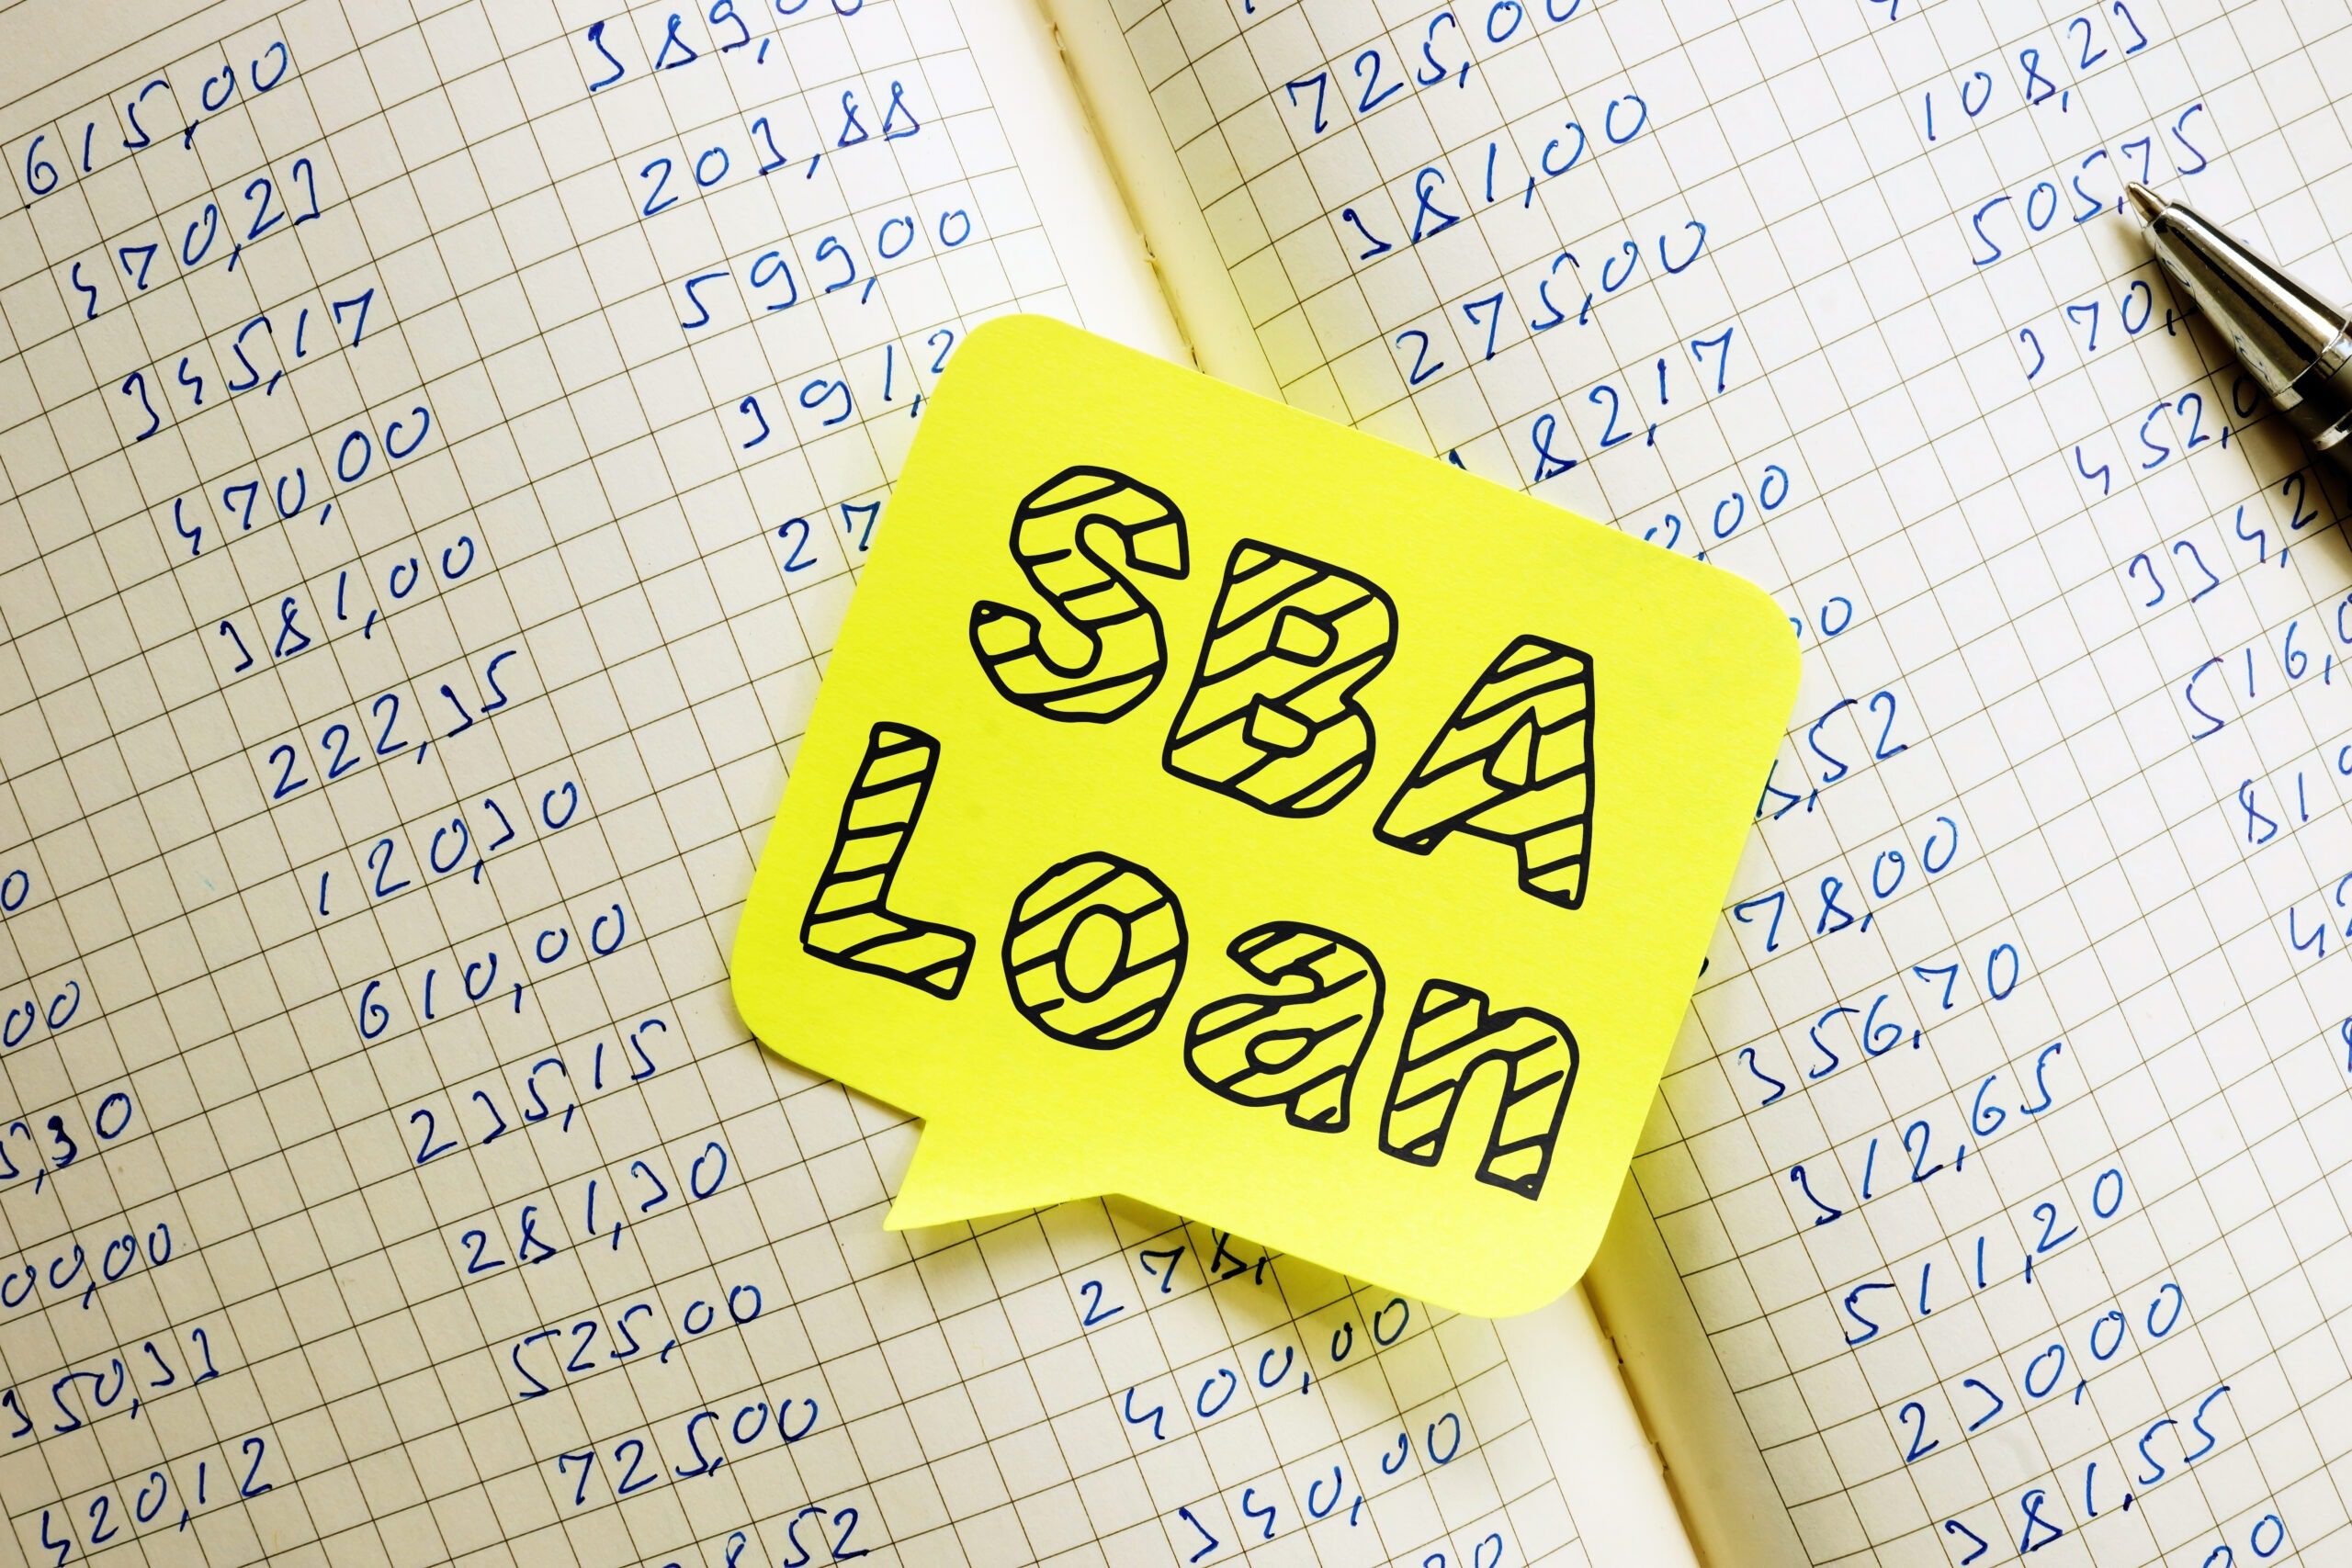 Sba,Loan,Is,Shown,On,The,Conceptual,Business,Photo